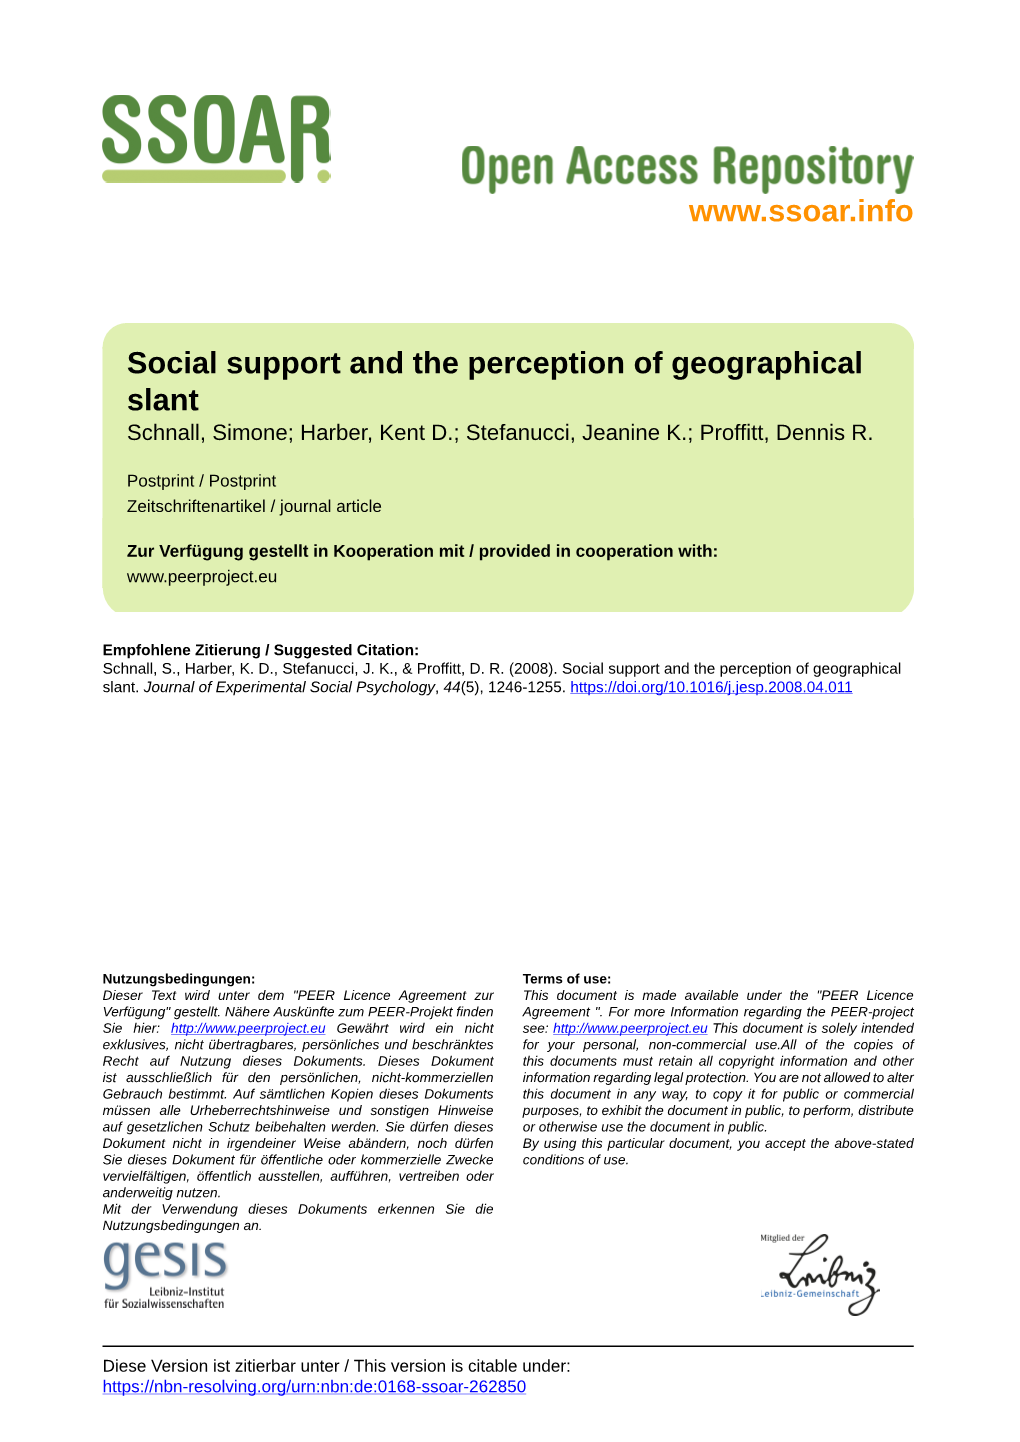 Social Support and the Perception of Geographical Slant Schnall, Simone; Harber, Kent D.; Stefanucci, Jeanine K.; Proffitt, Dennis R